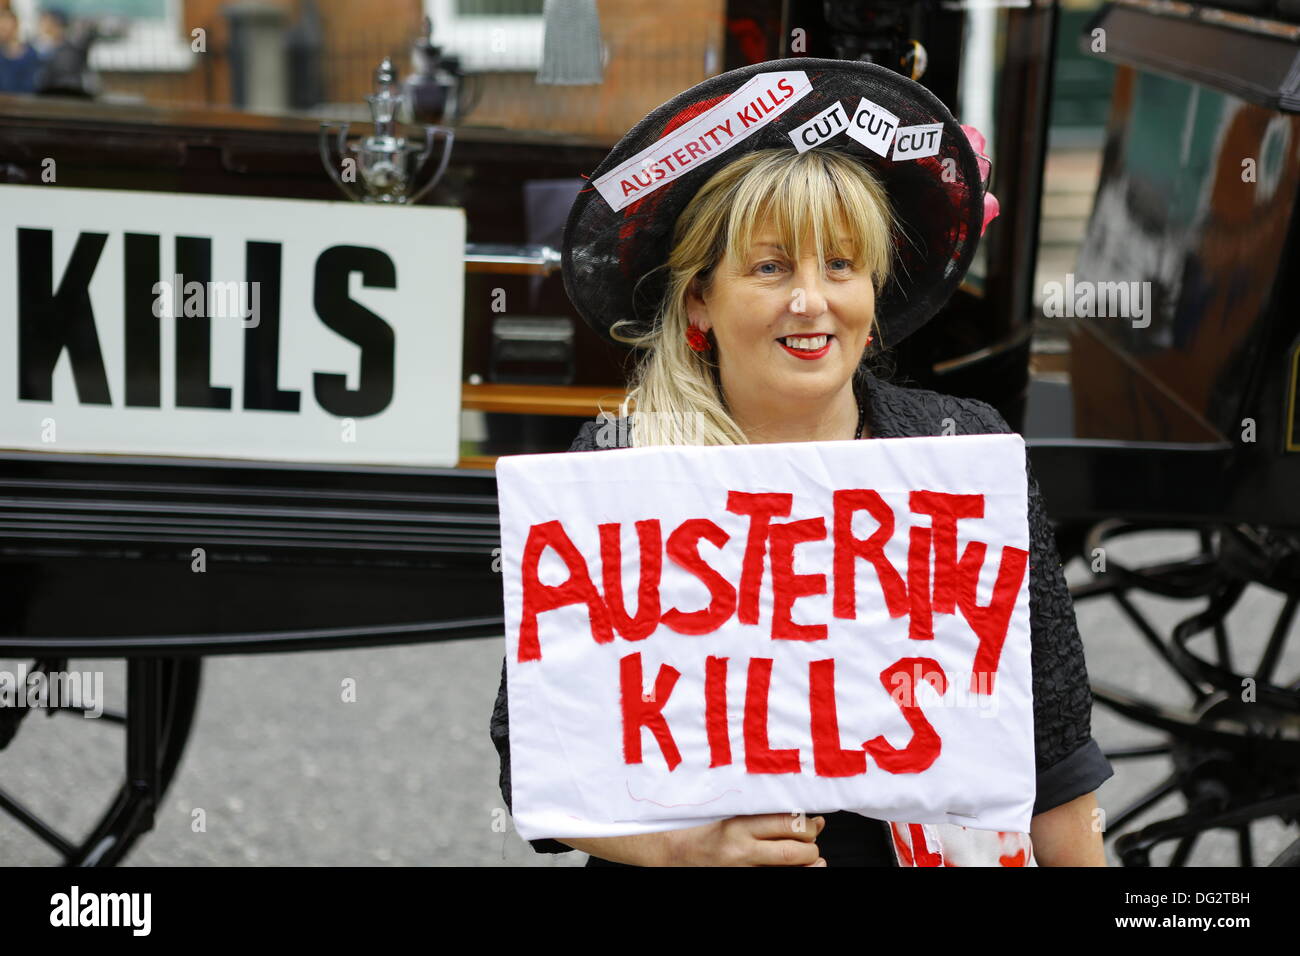 Dublin, Ireland. 12th October 2013. A member of the Spectacle of Defiance & Hope holds a sign that reads 'Austerity Kills'. Unions called for a protest march through Dublin, ahead of the announcing of the 2014 budget next week. They protested against cuts in Social Welfare, Health and Education and for an utilisation of alternative revenue sources by the government. © Michael Debets/Alamy Live News Stock Photo